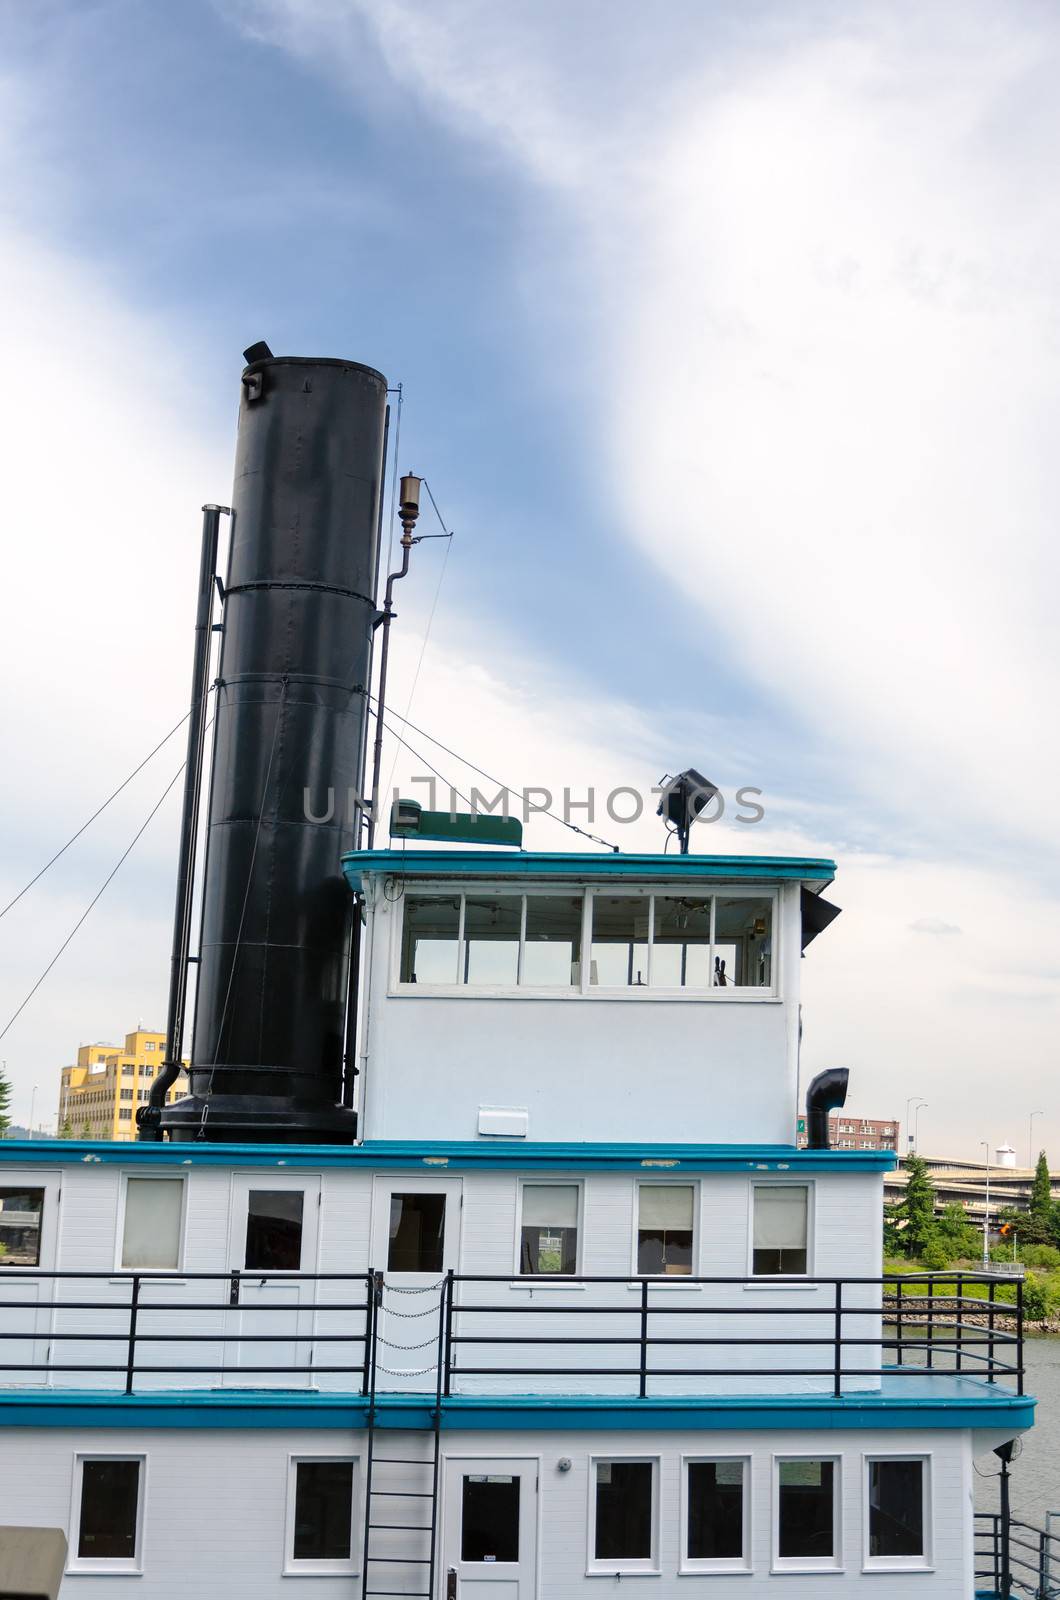 Old historic paddle steamer in the waterfront area of Portland, Oregon